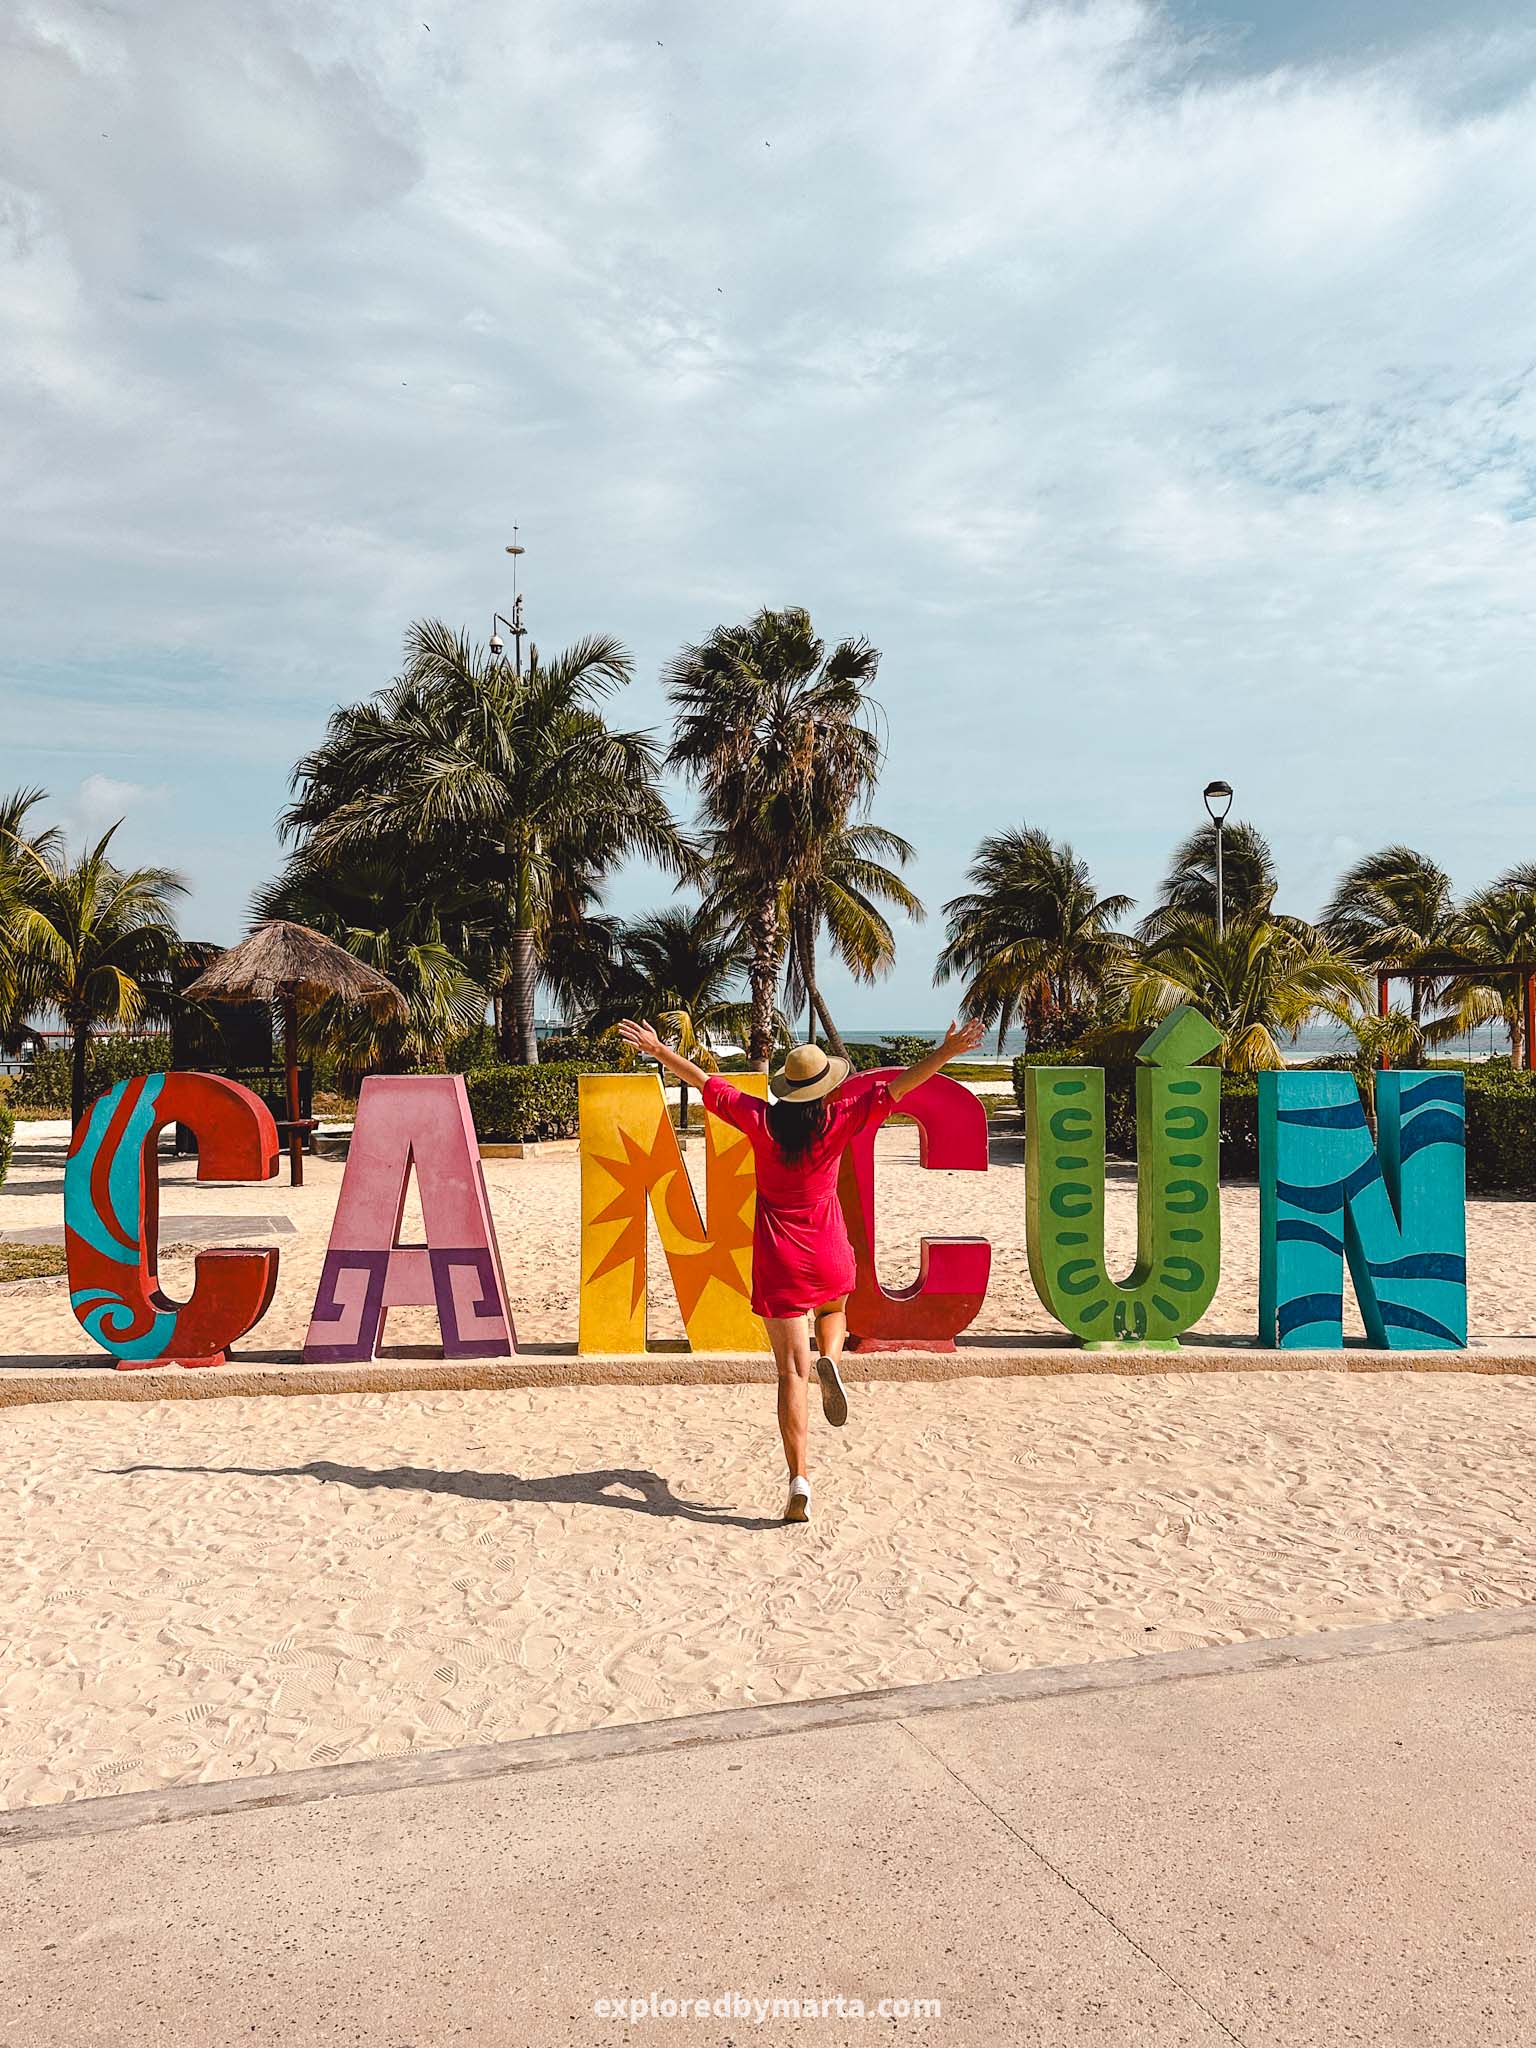 Cancun, Mexico - the colorful Cancun letters at Playa Langosta